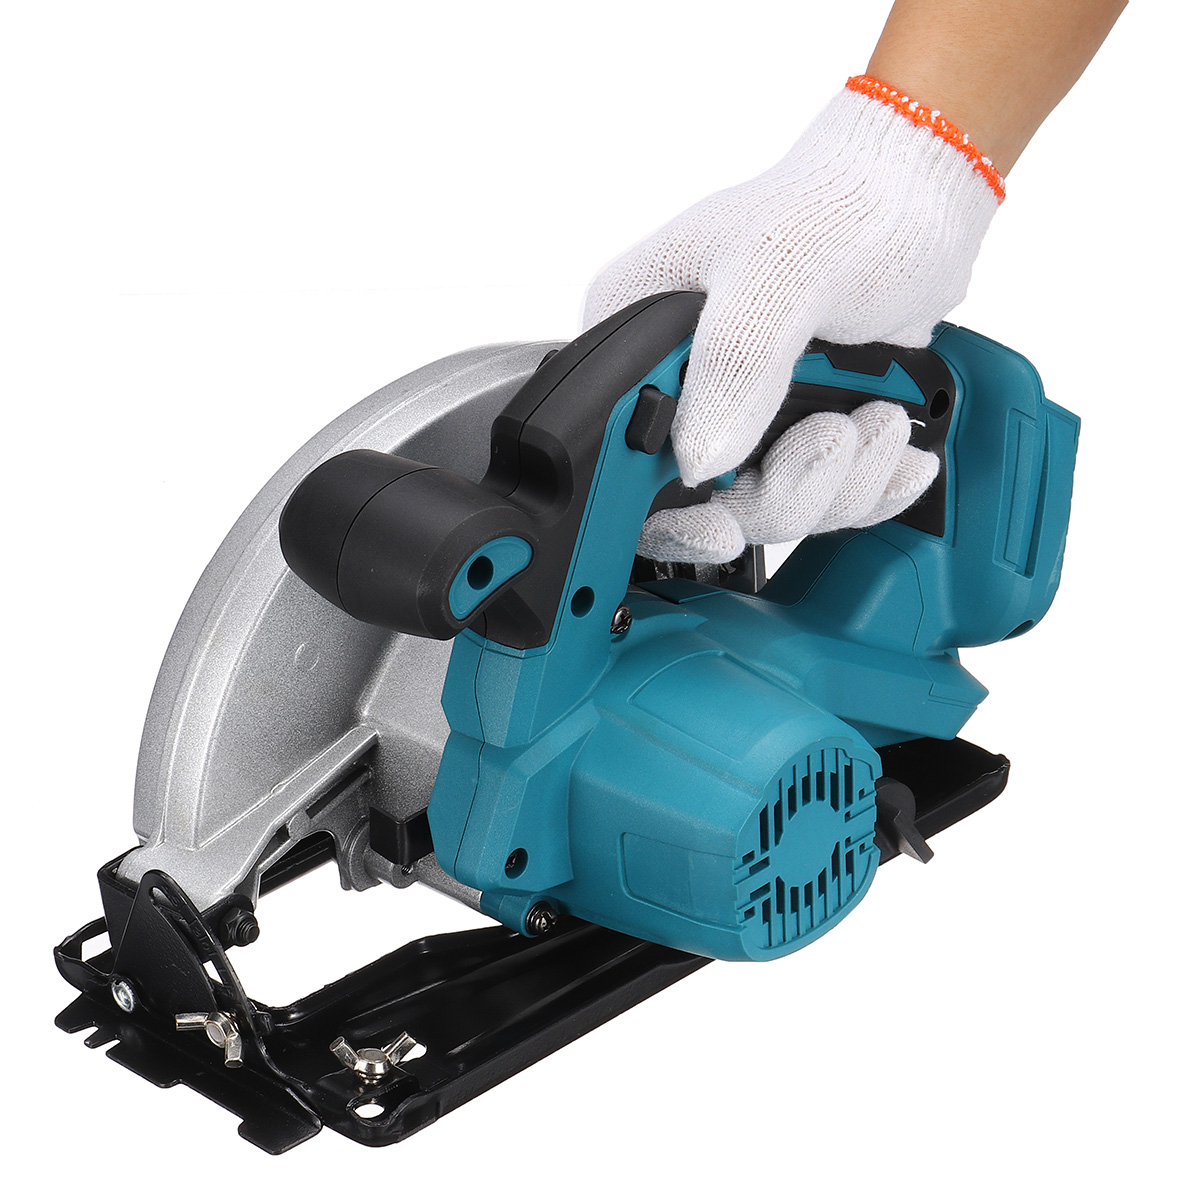 Find 190mm Cordless Electric Circular Saw Fit Makita 3800r/min Cordless Circular Saw Tool for Sale on Gipsybee.com with cryptocurrencies